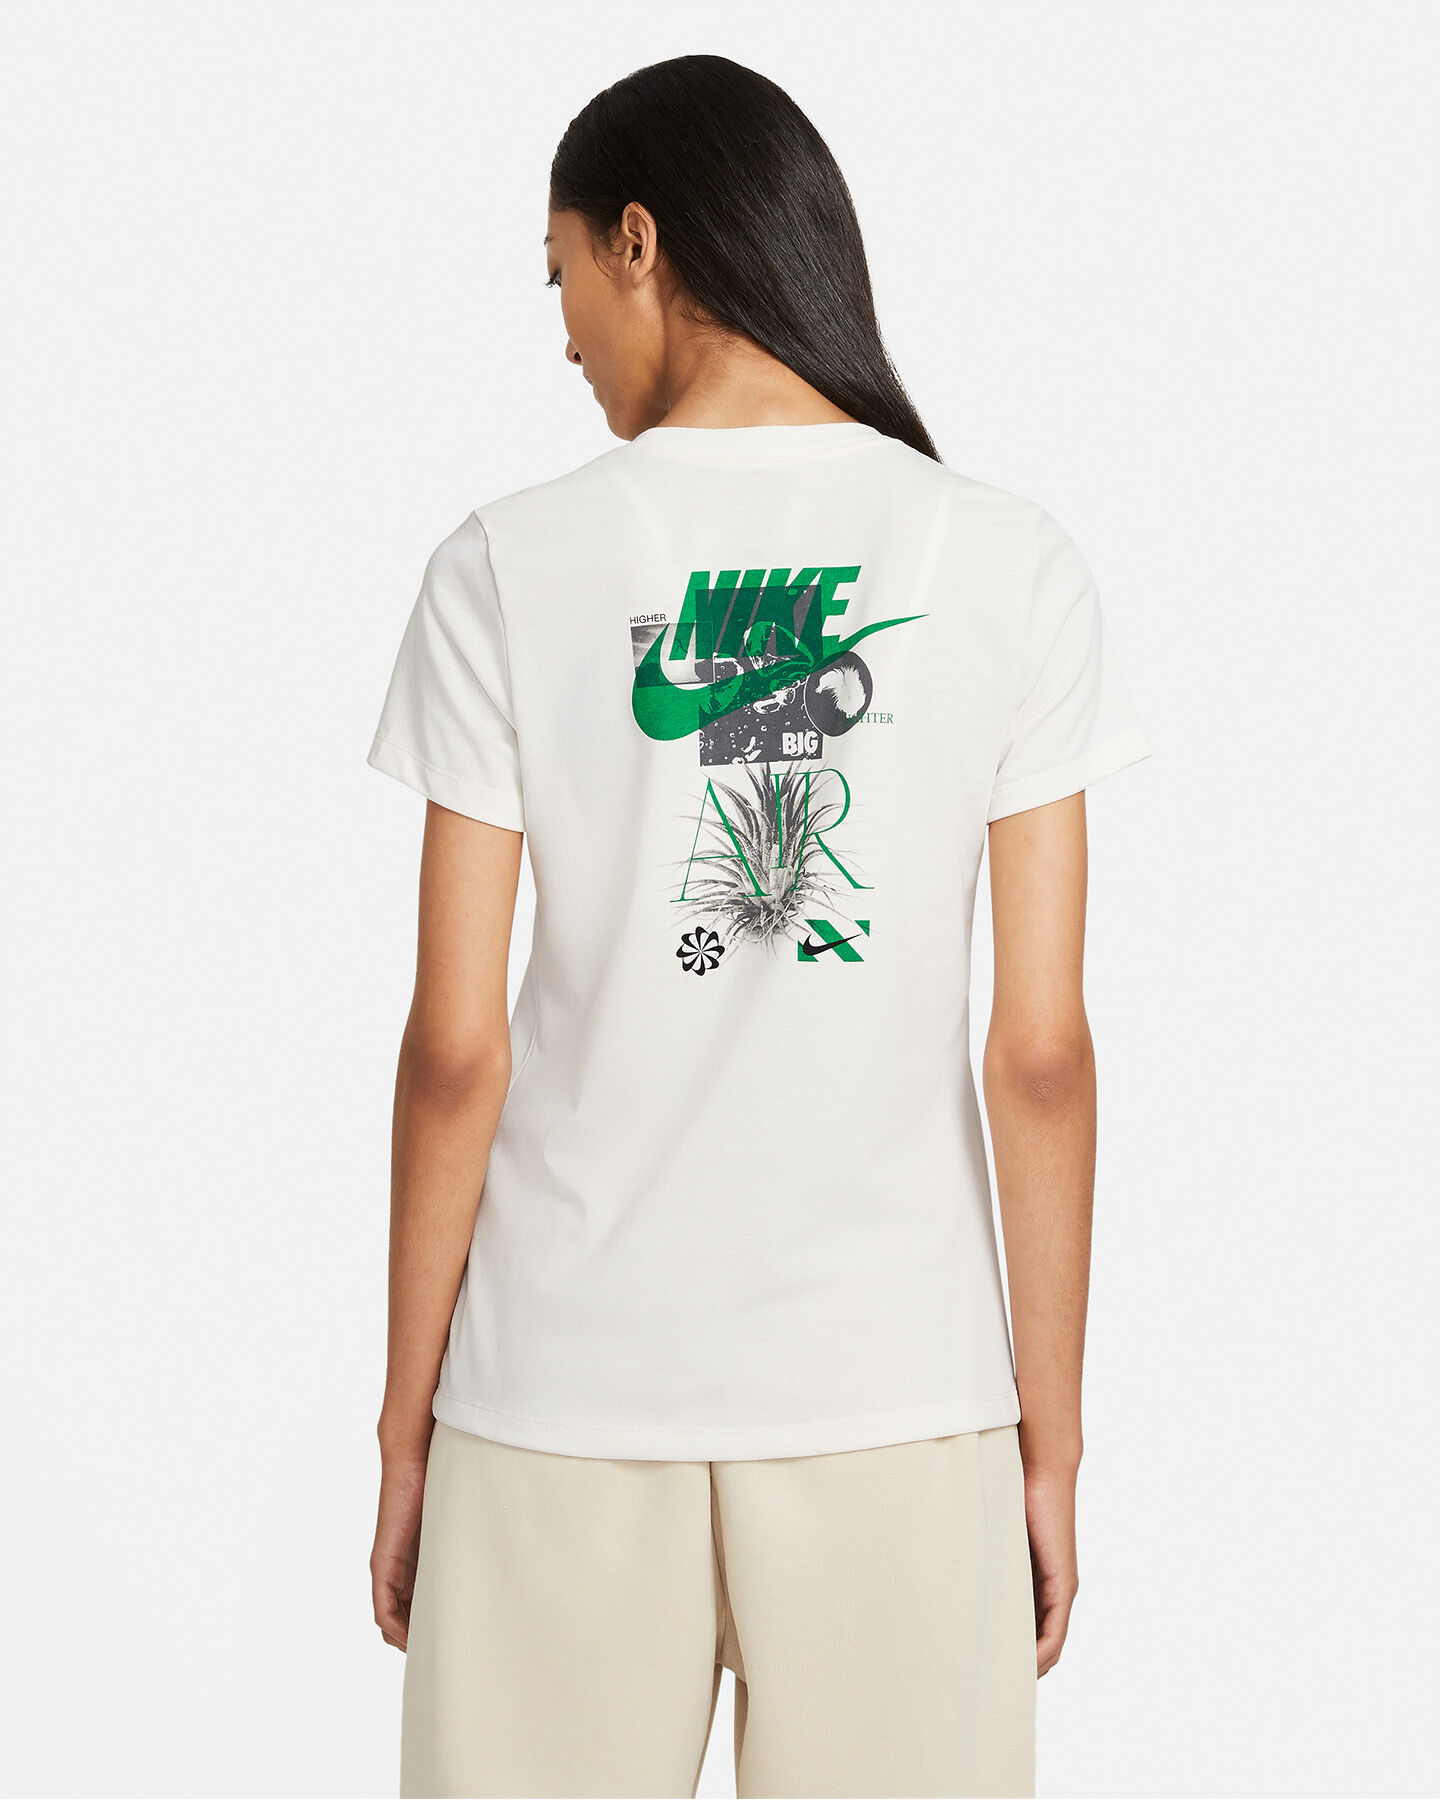  T-Shirt NIKE LOGO EARTH DAY W S5267755 scatto 1